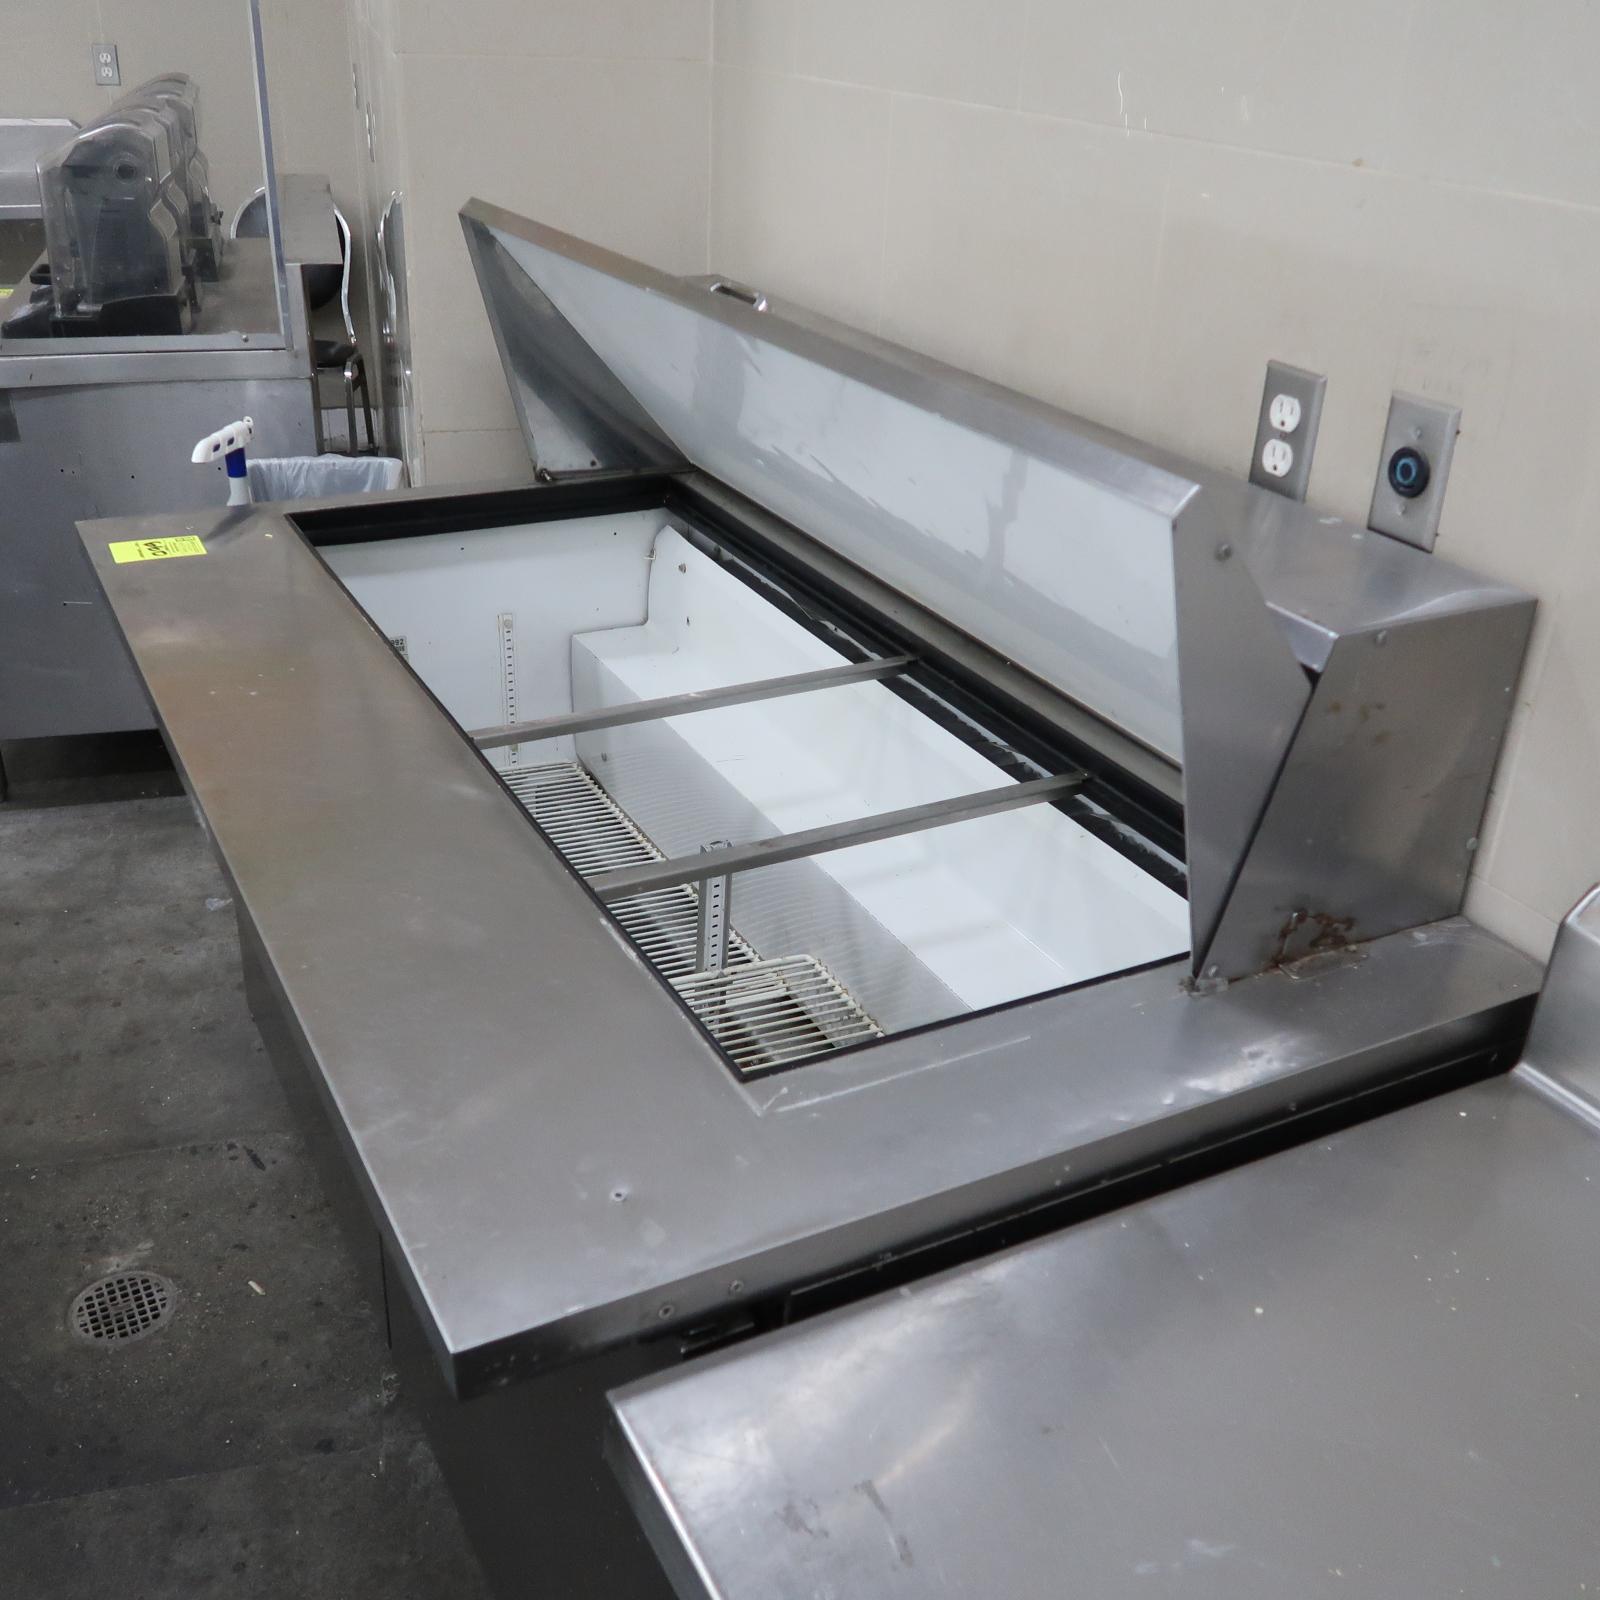 True self-contained refrigerated prep table